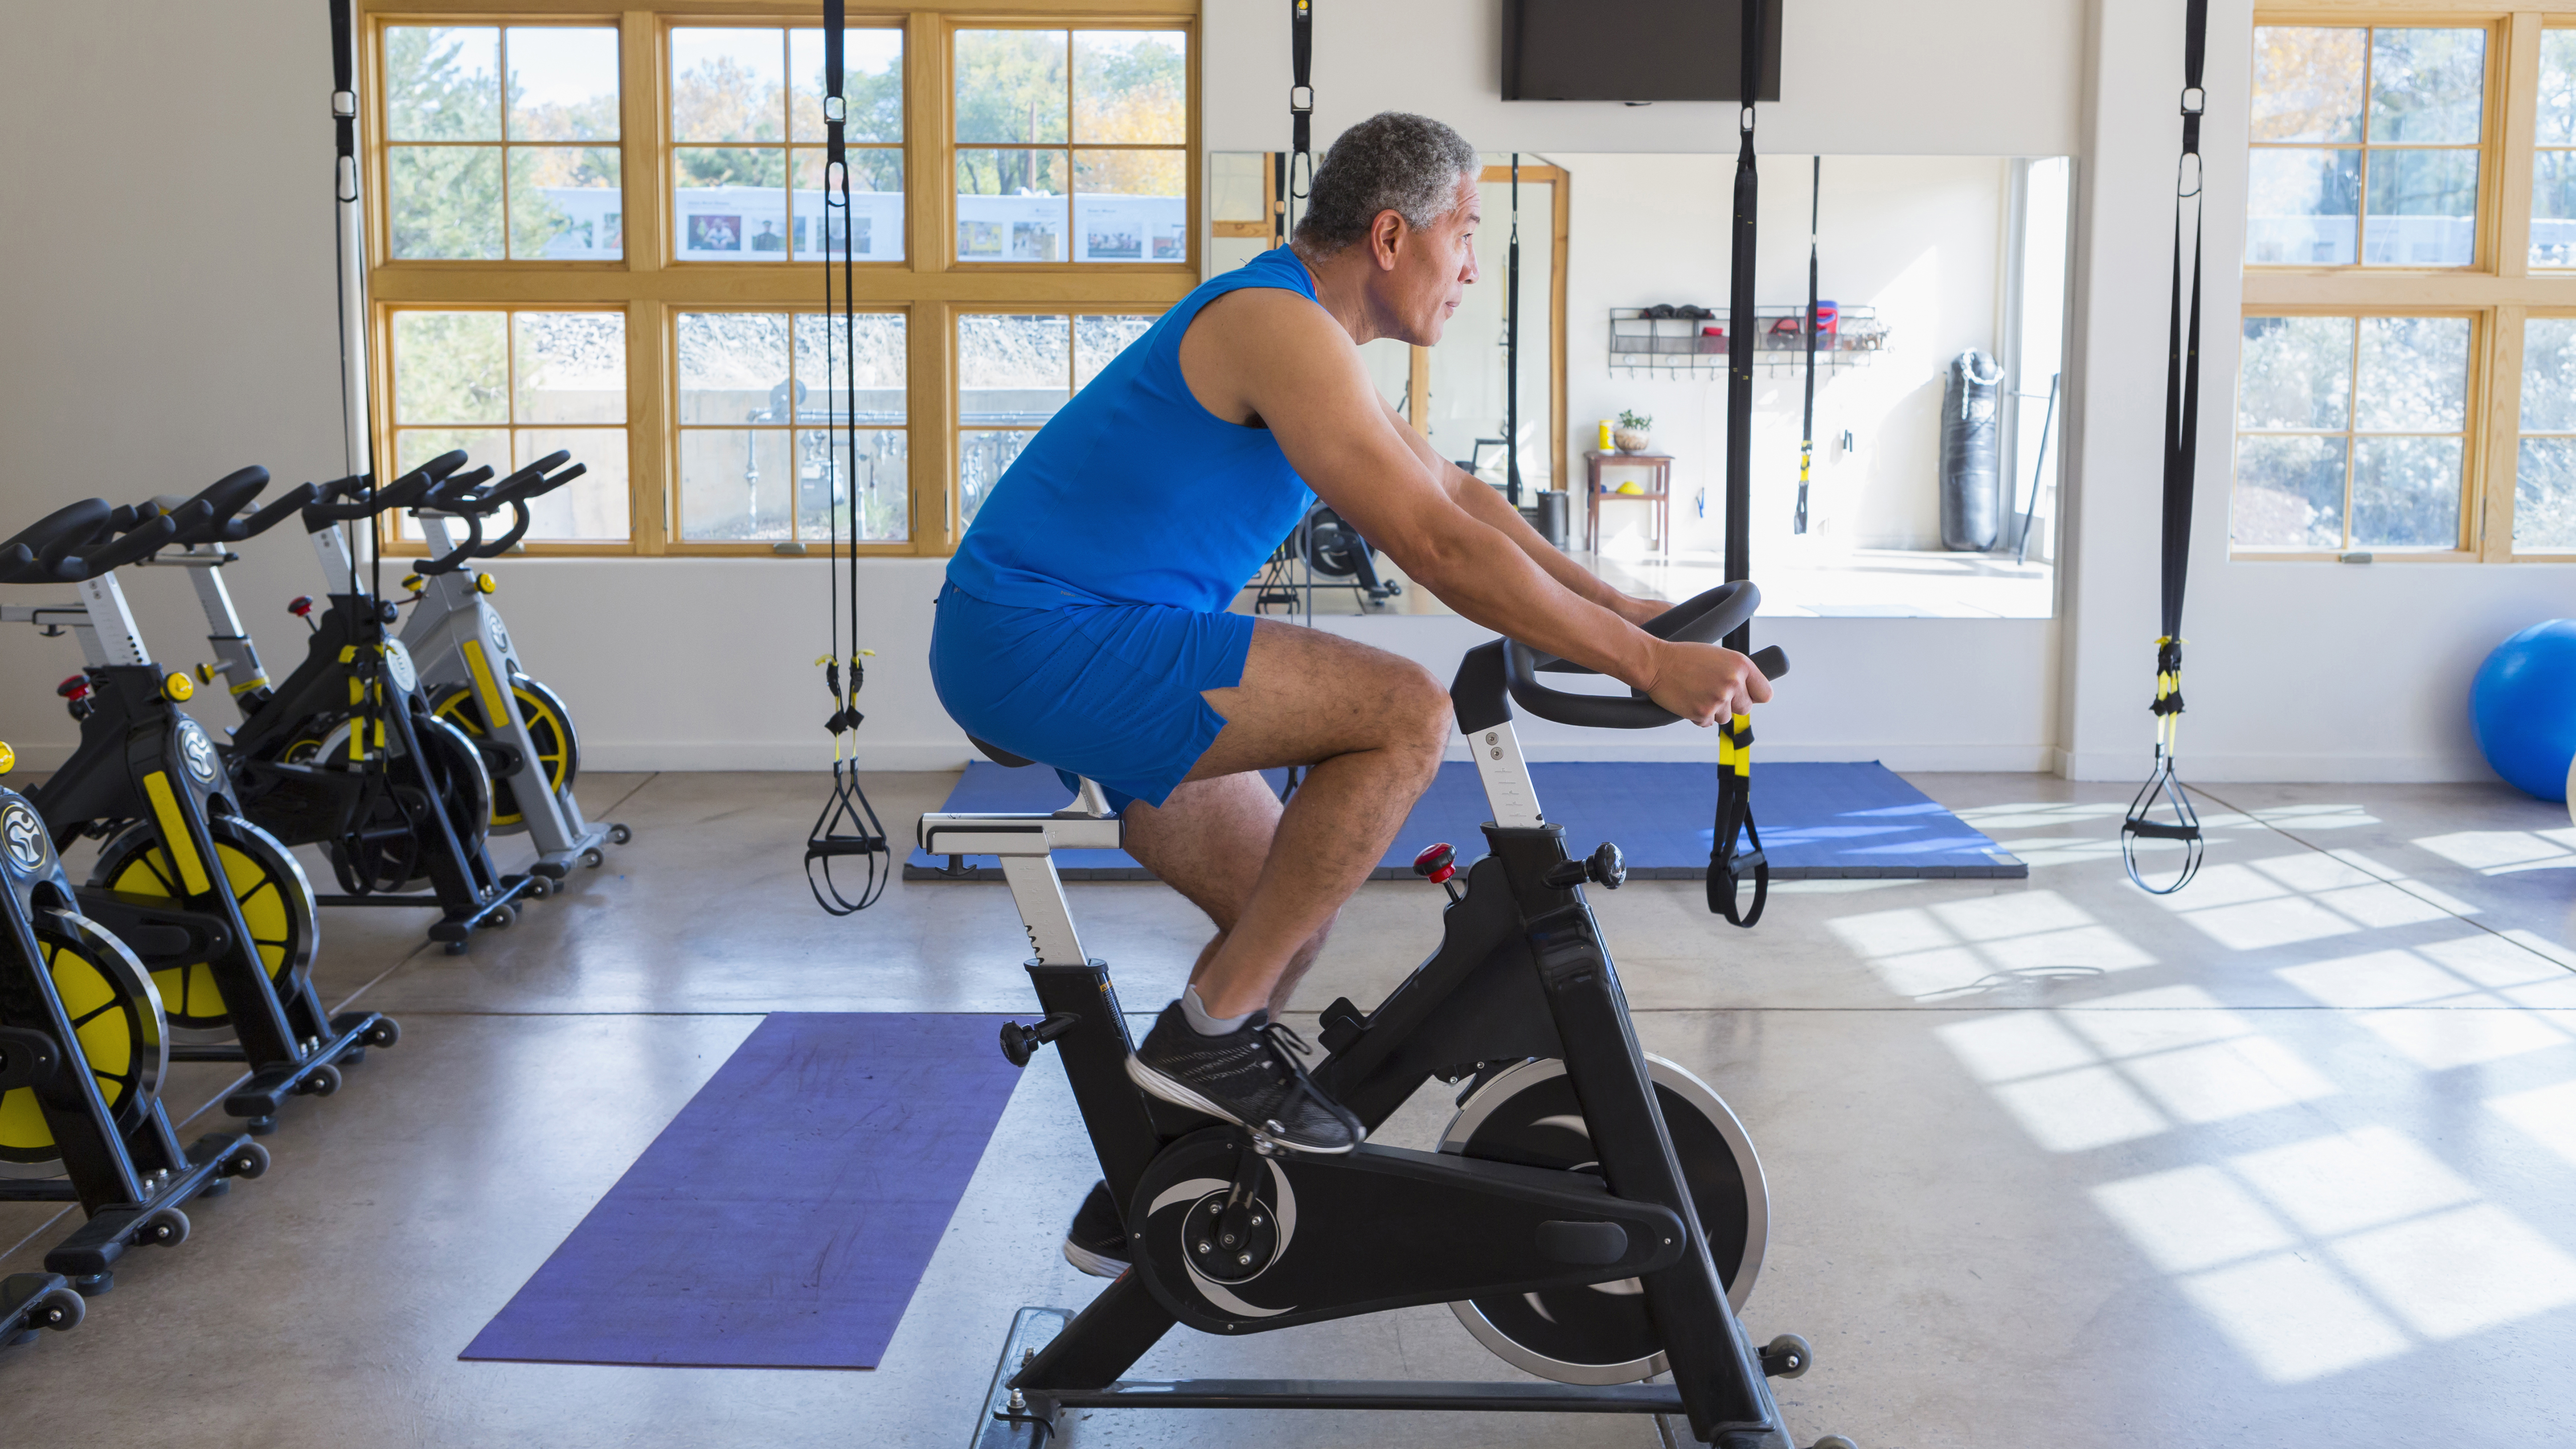 A man trains on a stationary bike in the gym